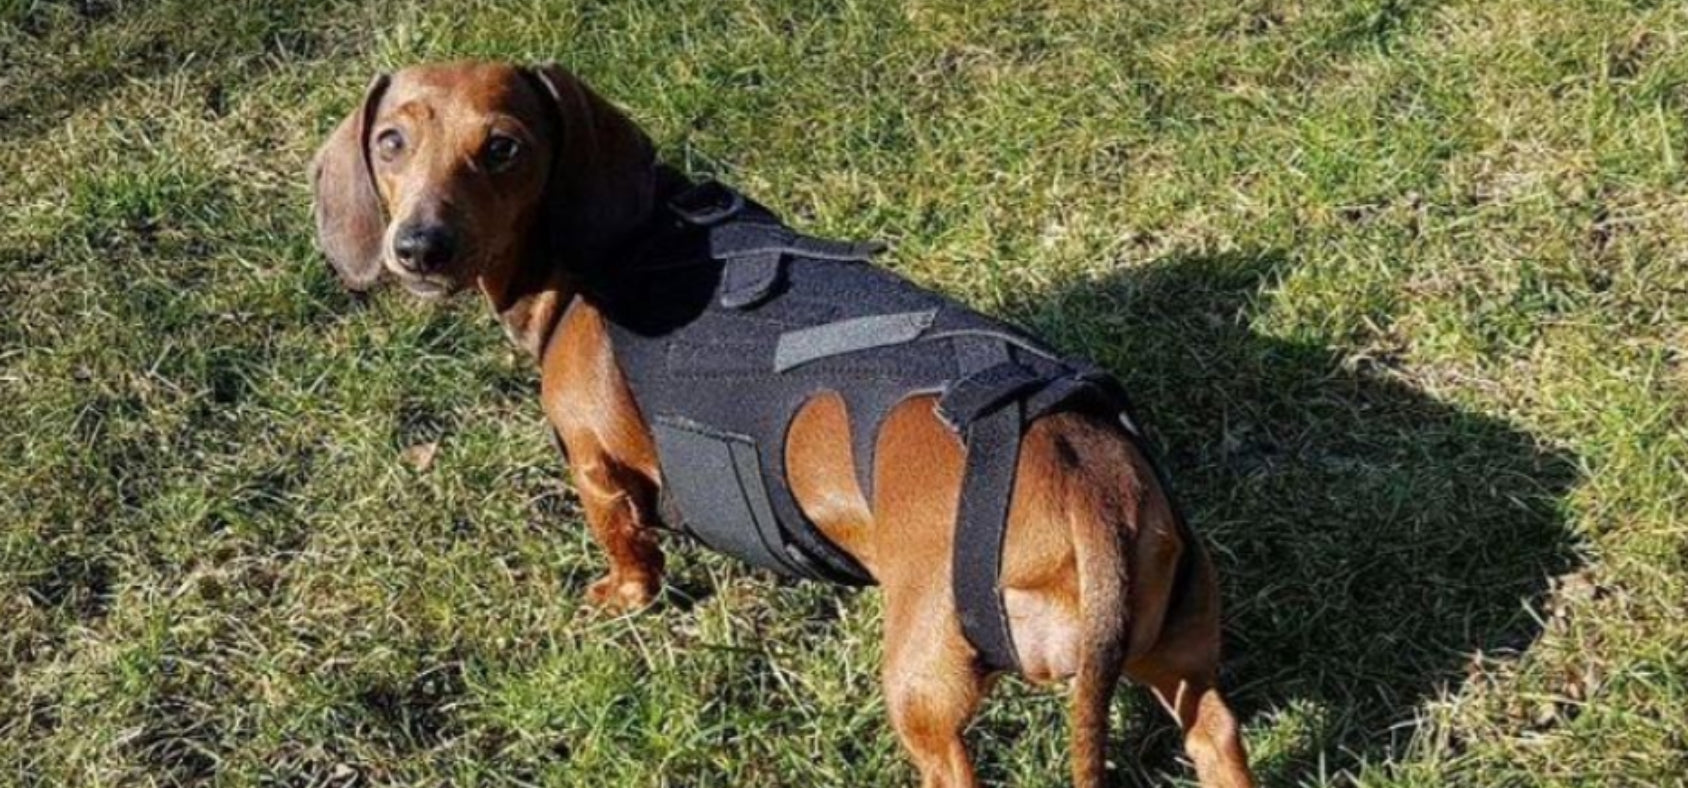 Buying a Back Brace for your Dog